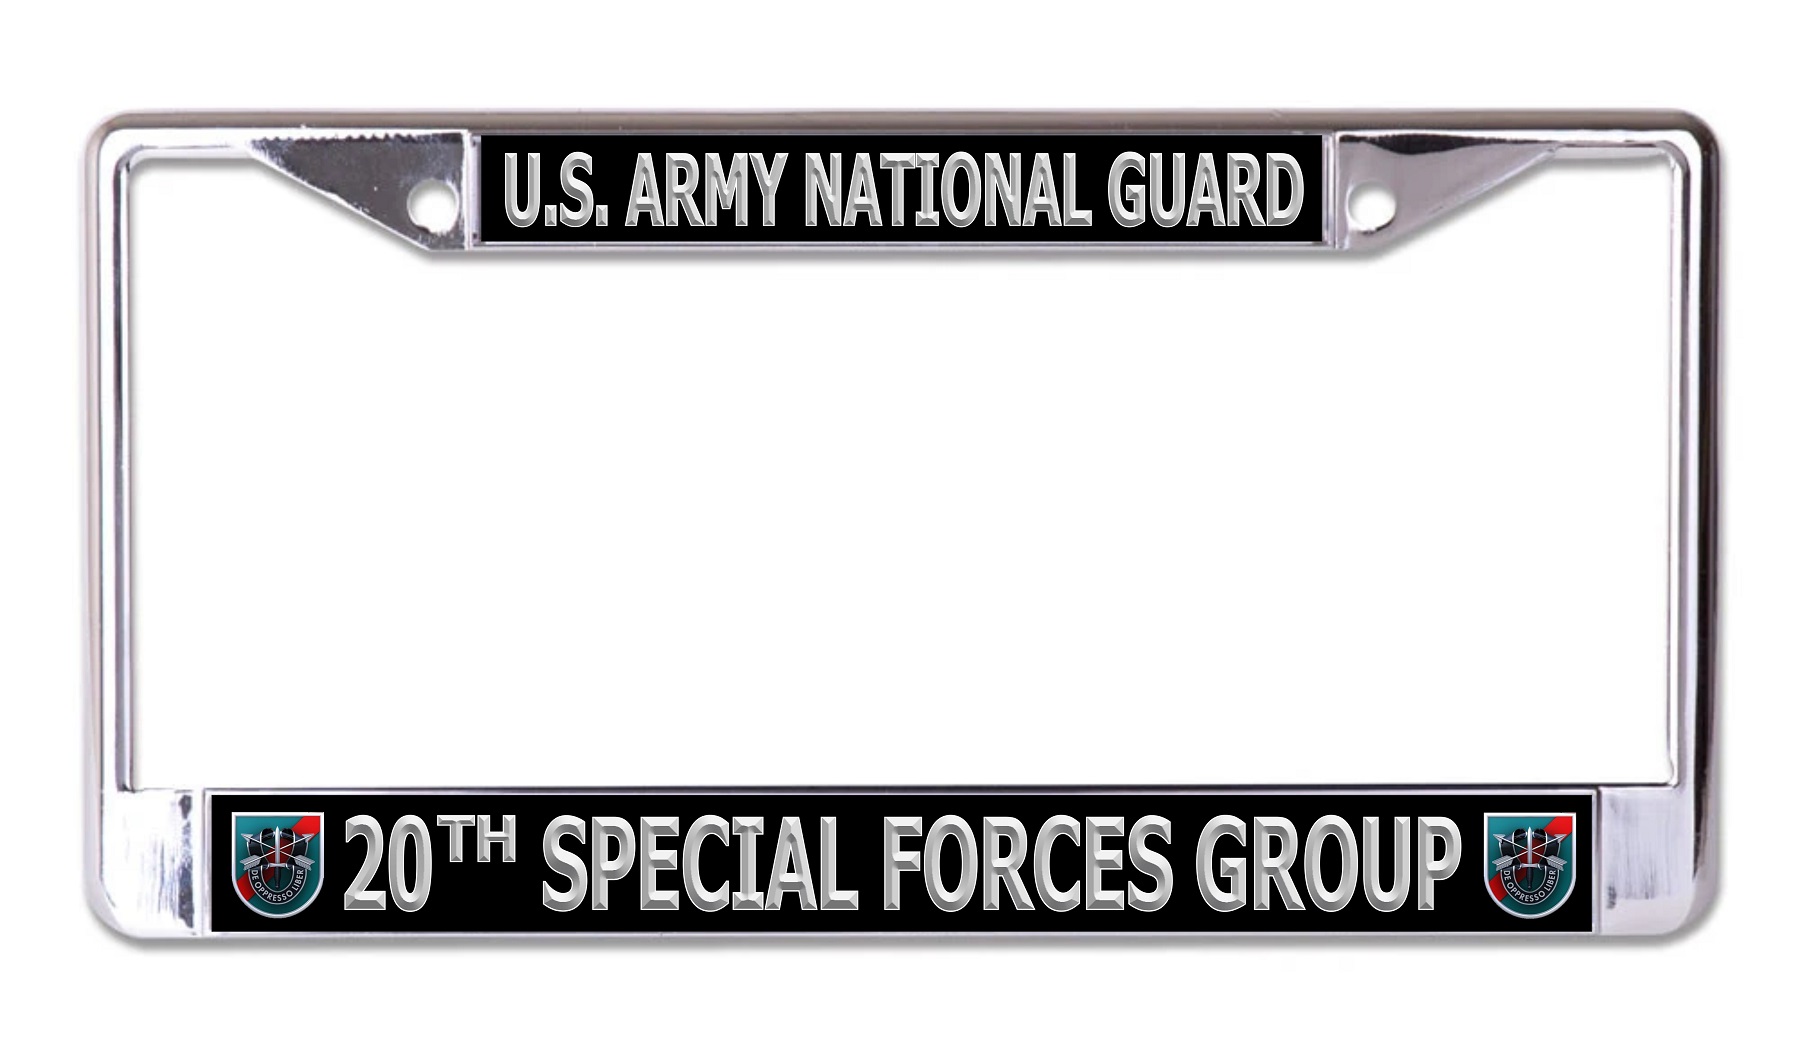 U.S. Army National Guard 20th Special Forces Group Chrome License Plate FRAME